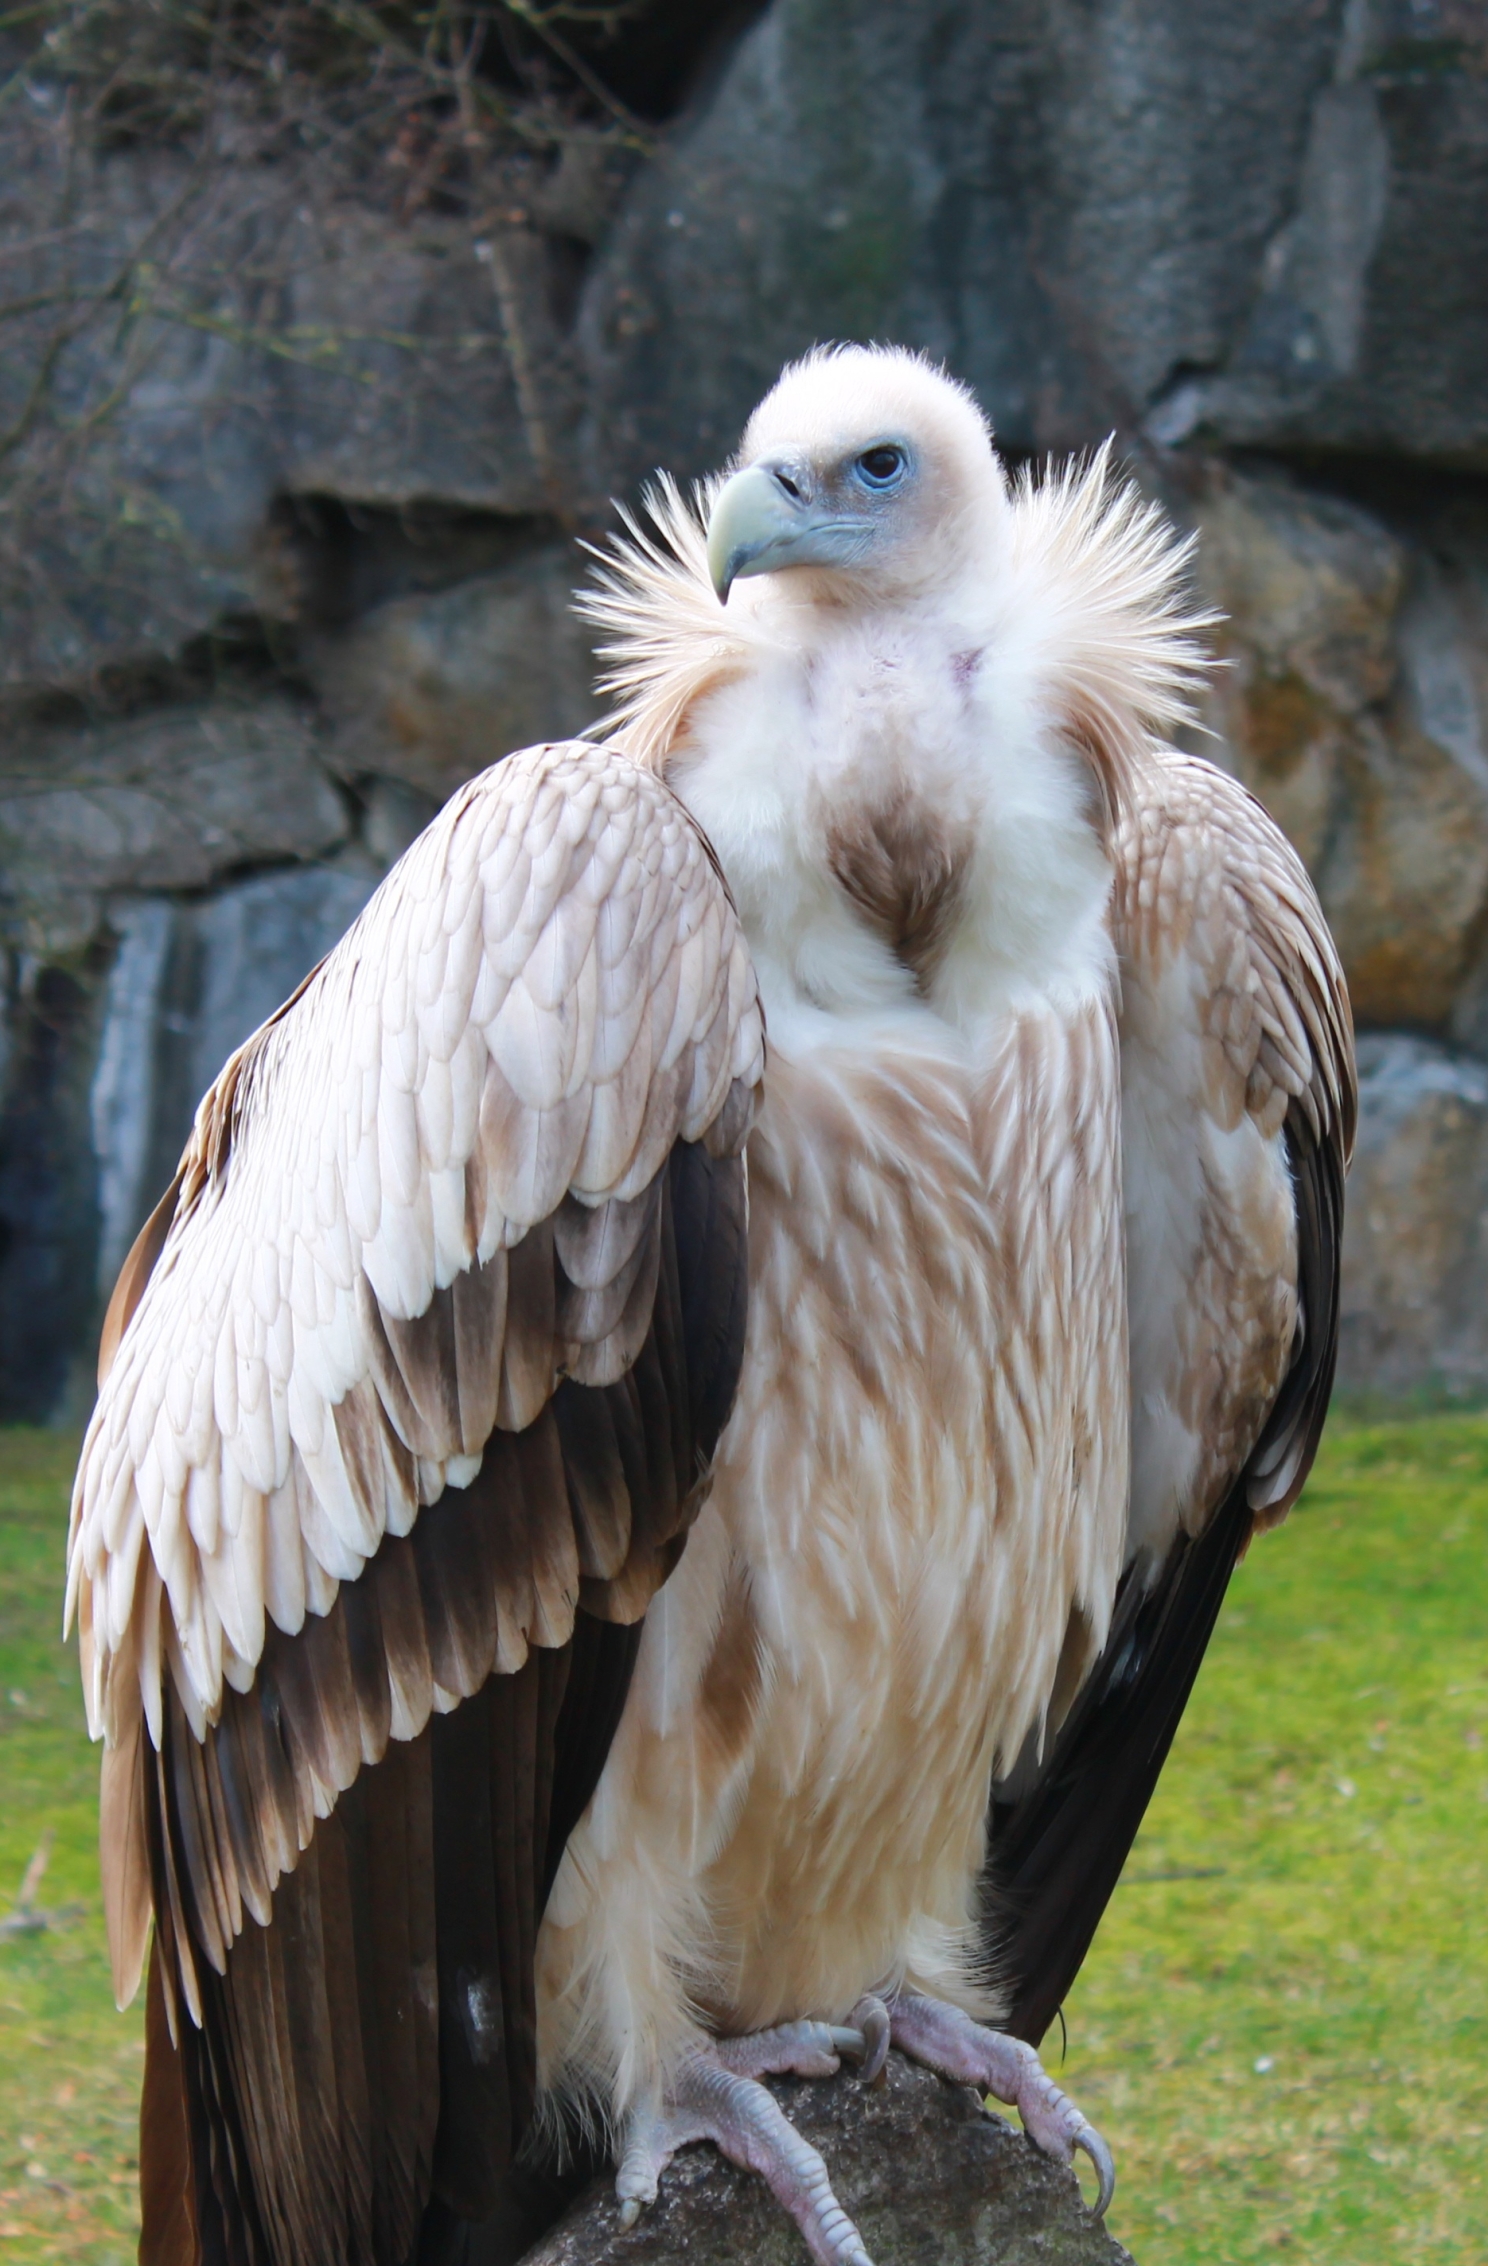 A vulture in the Berlin zoo by SusyNoda